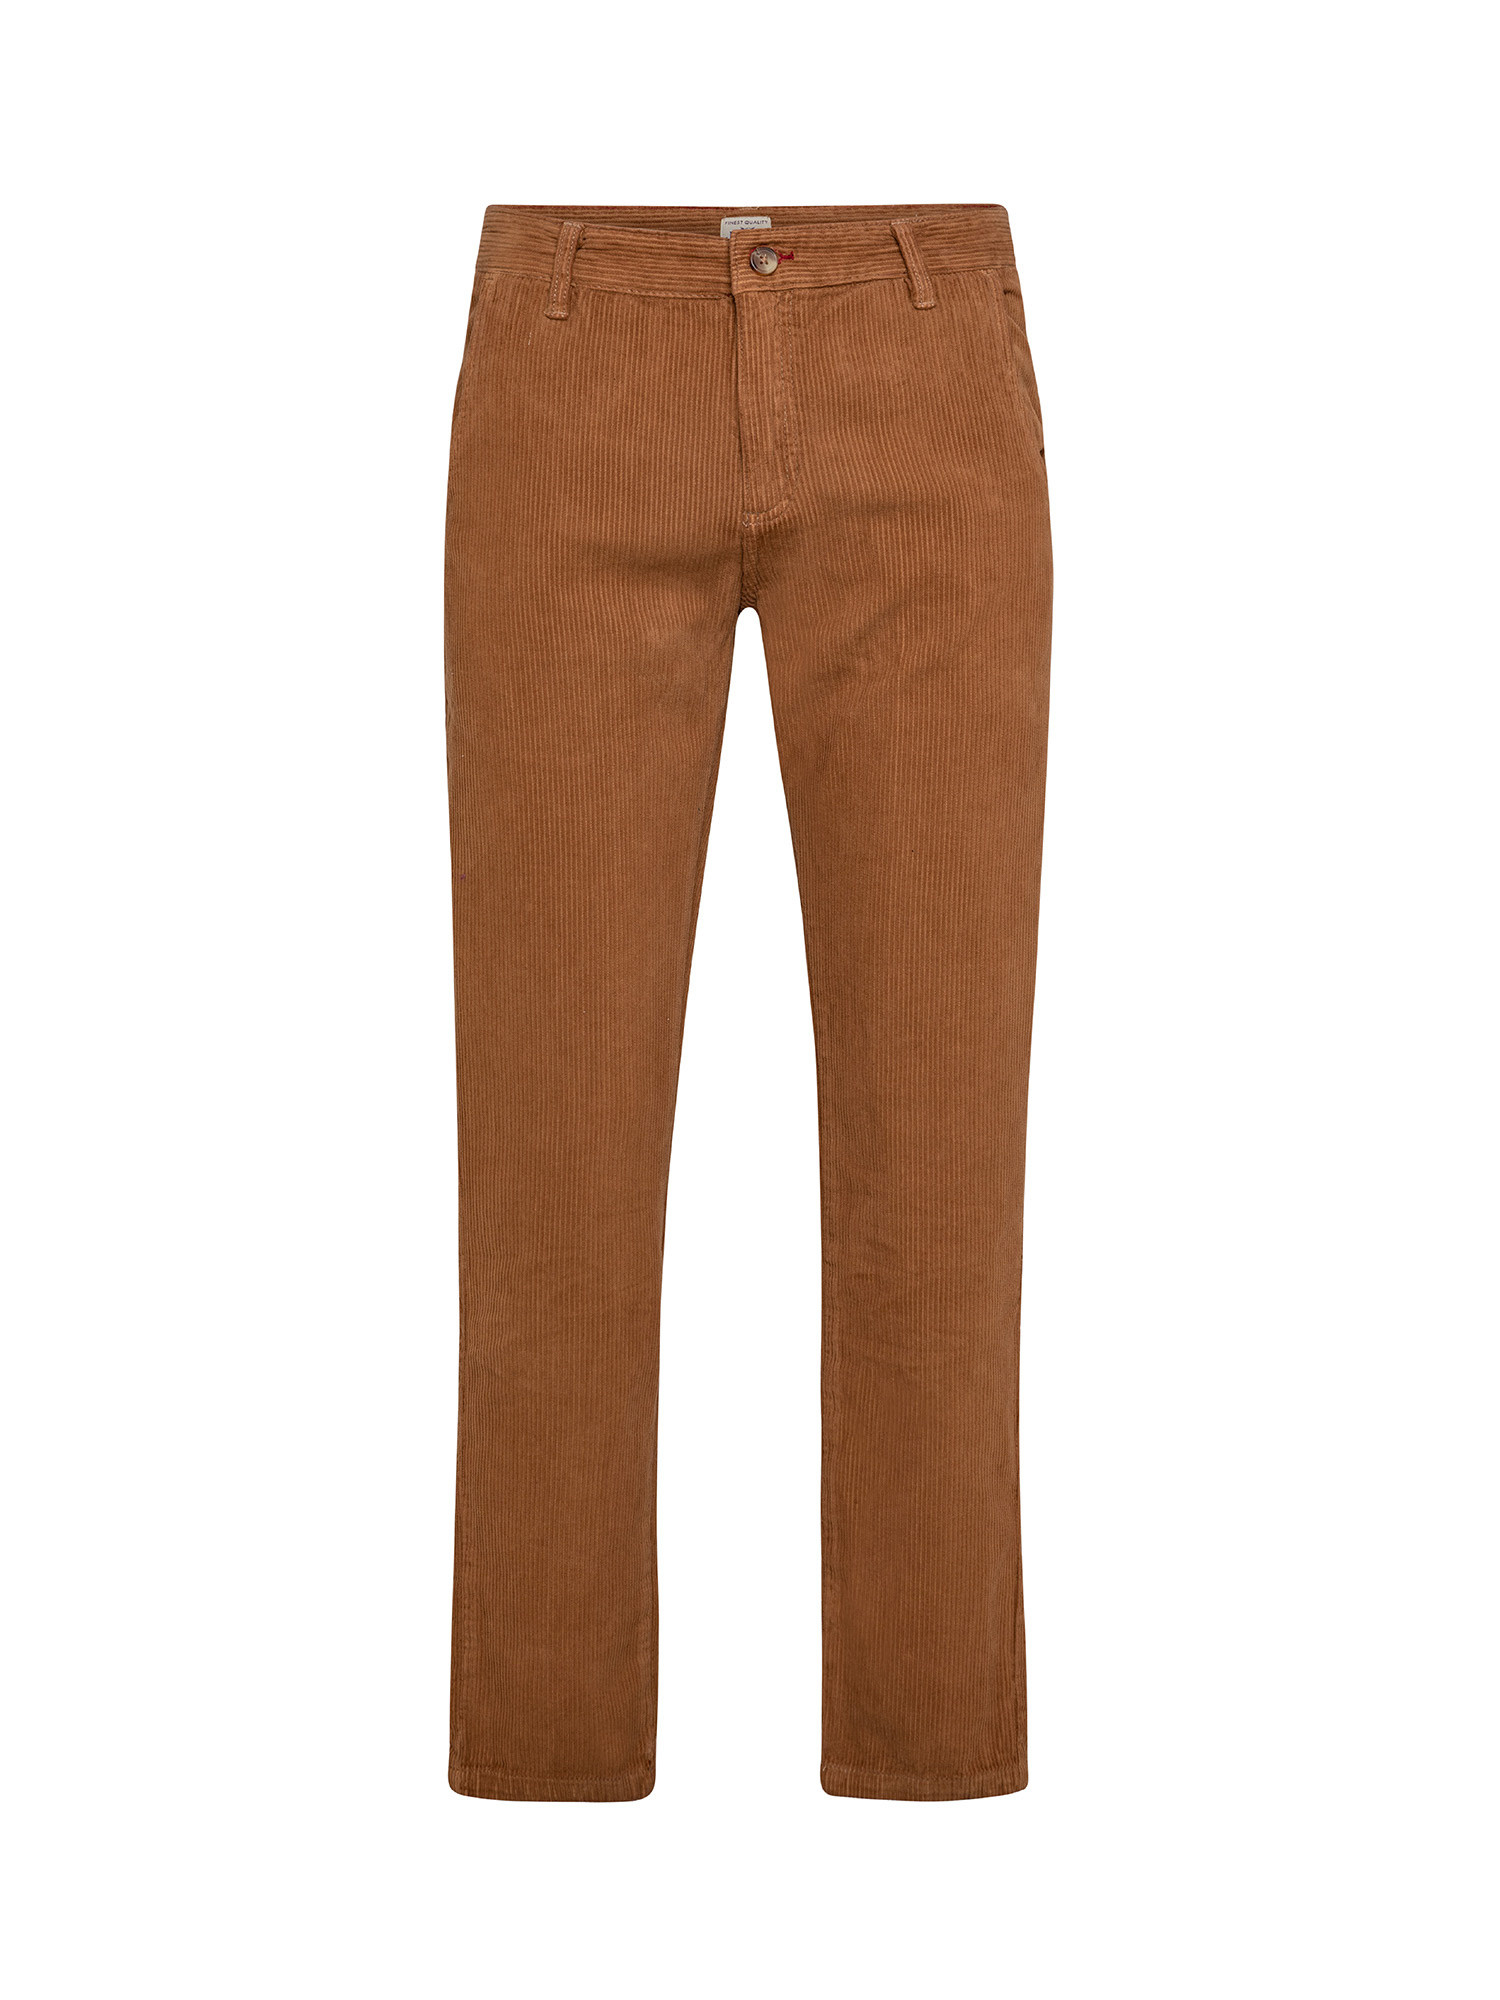 JCT - Pantalone chino in velluto, Marrone, large image number 0